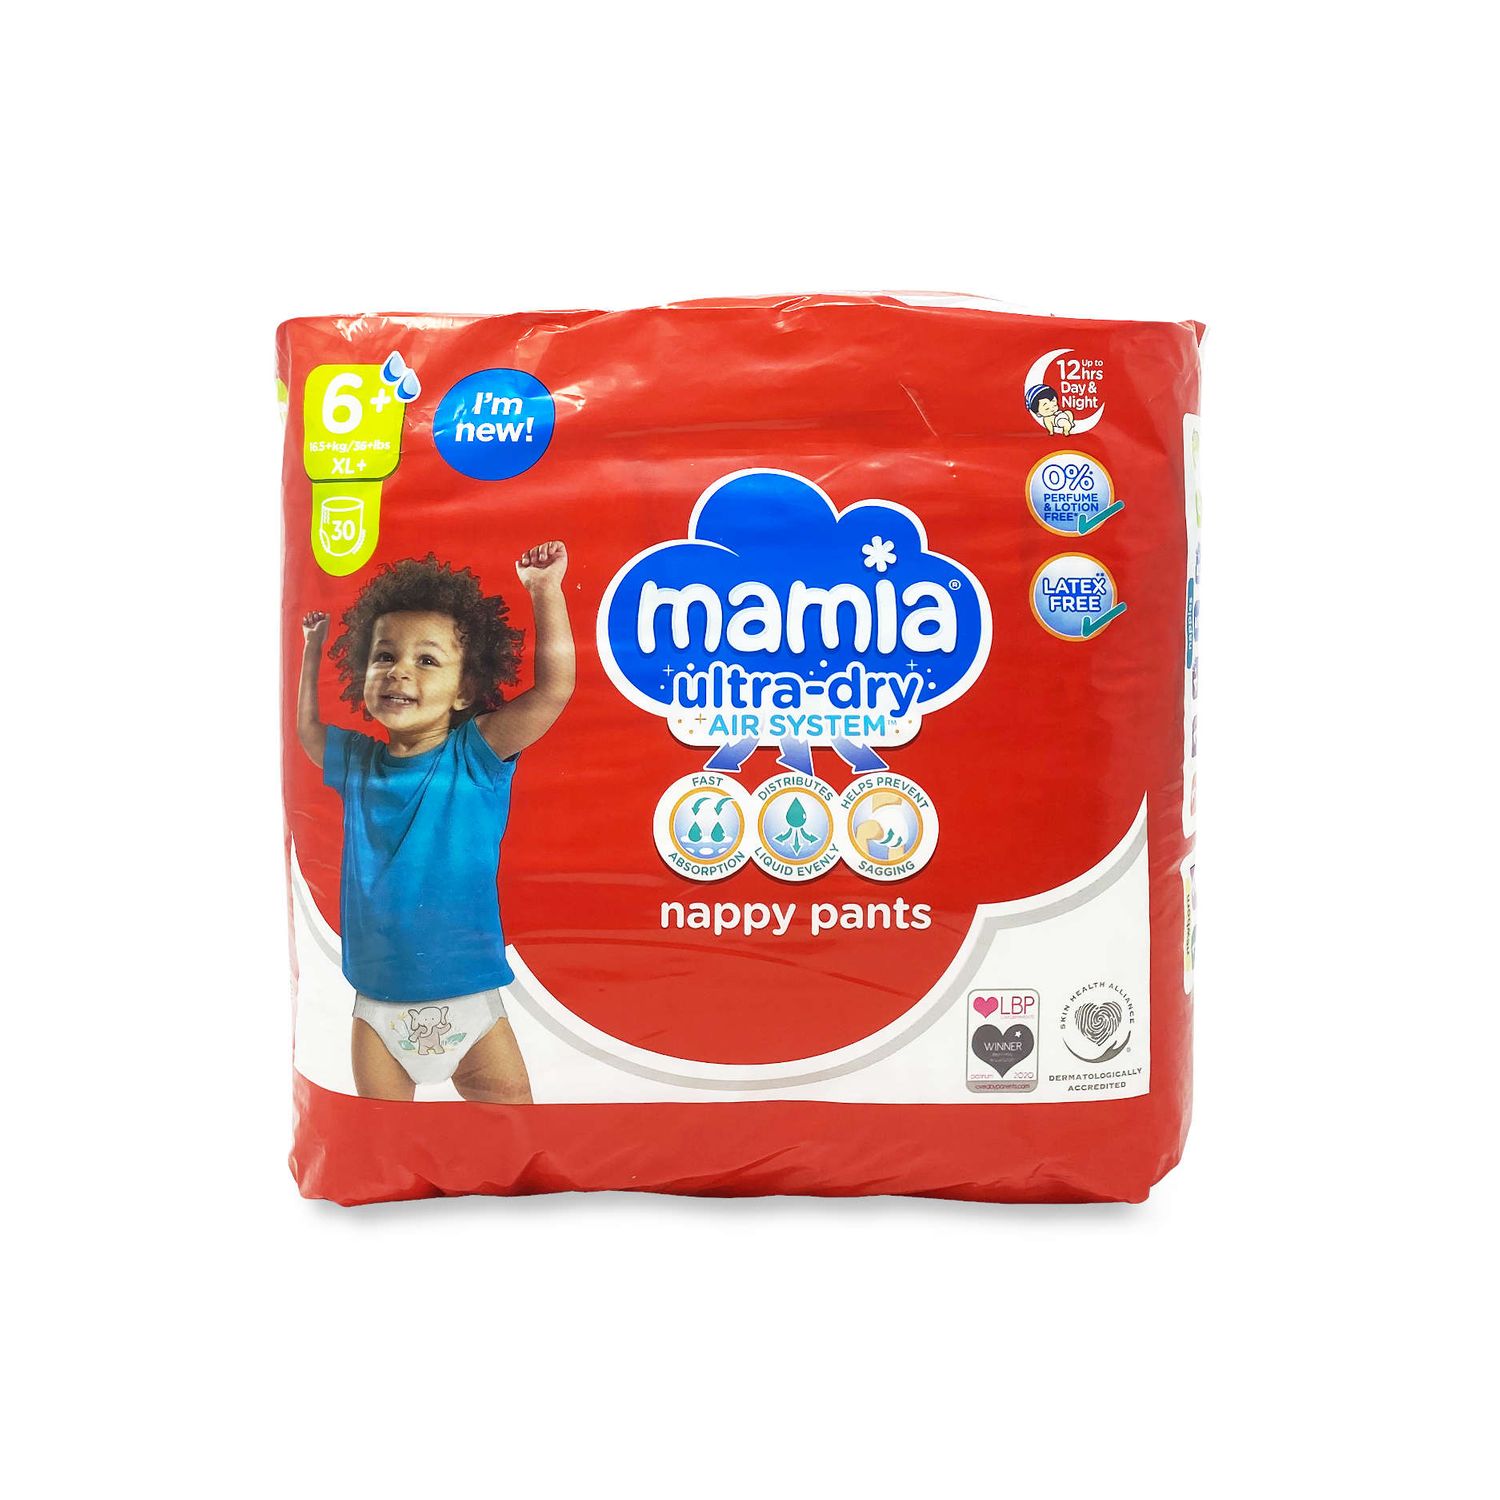 Netmums testers have been trying out the Aldi Mamia Size 7 nappy pants   YouTube